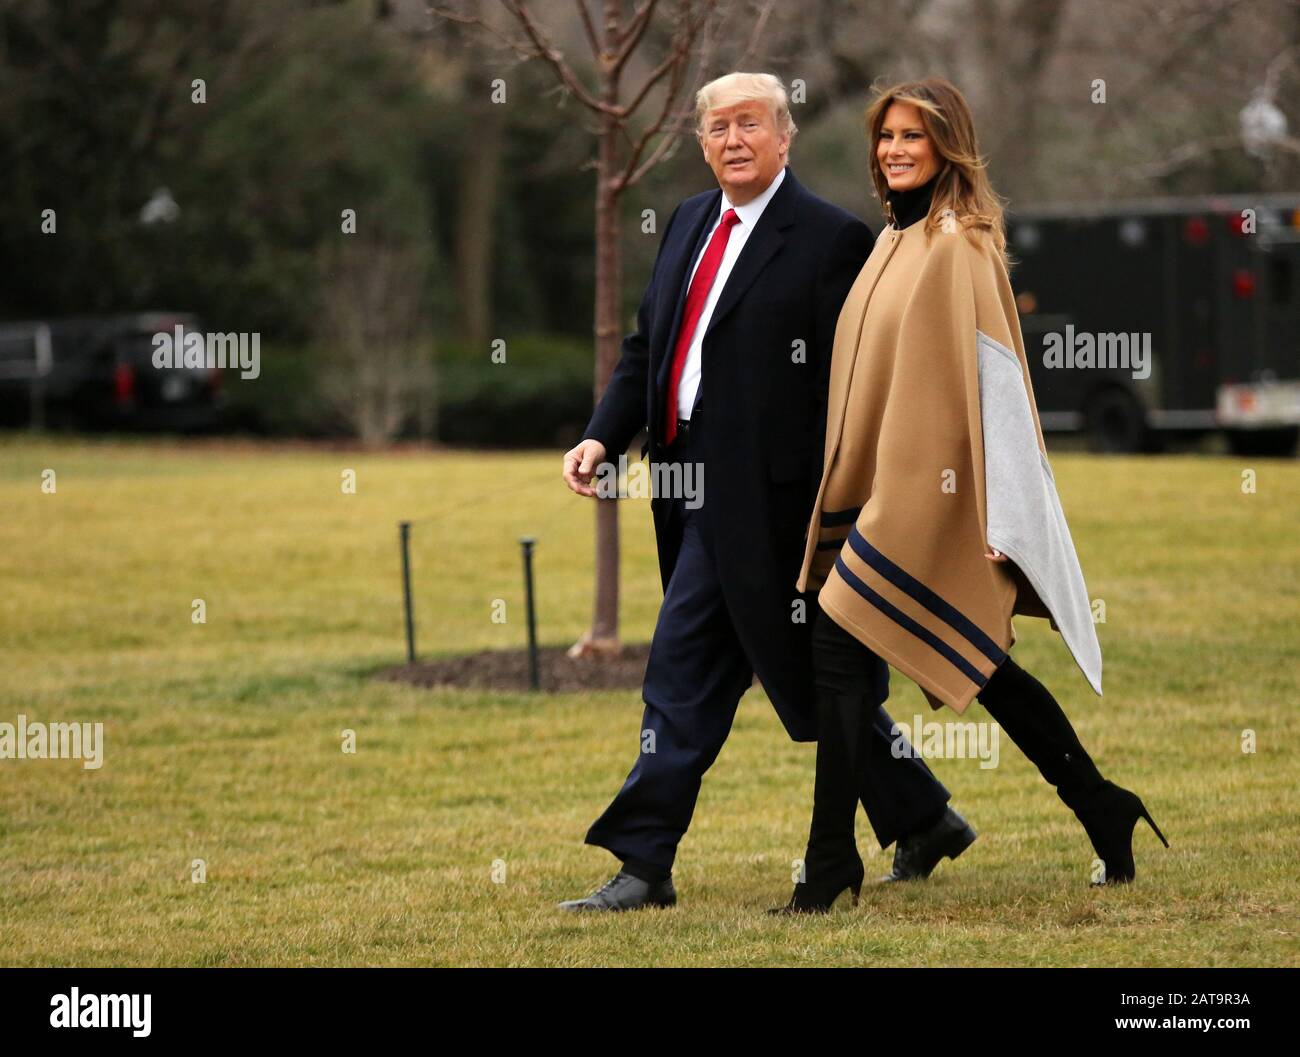 Washington, United States. 31st Jan, 2020. U.S. President Donald Trump and First Lady Melania Trump depart the South Lawn of the White House in Washington, DC for a weekend away at their Mar-a-Lago resort in Florida, on Friday, January 31, 2020. Photo by Martin H. Simon/UPI Credit: UPI/Alamy Live News Stock Photo